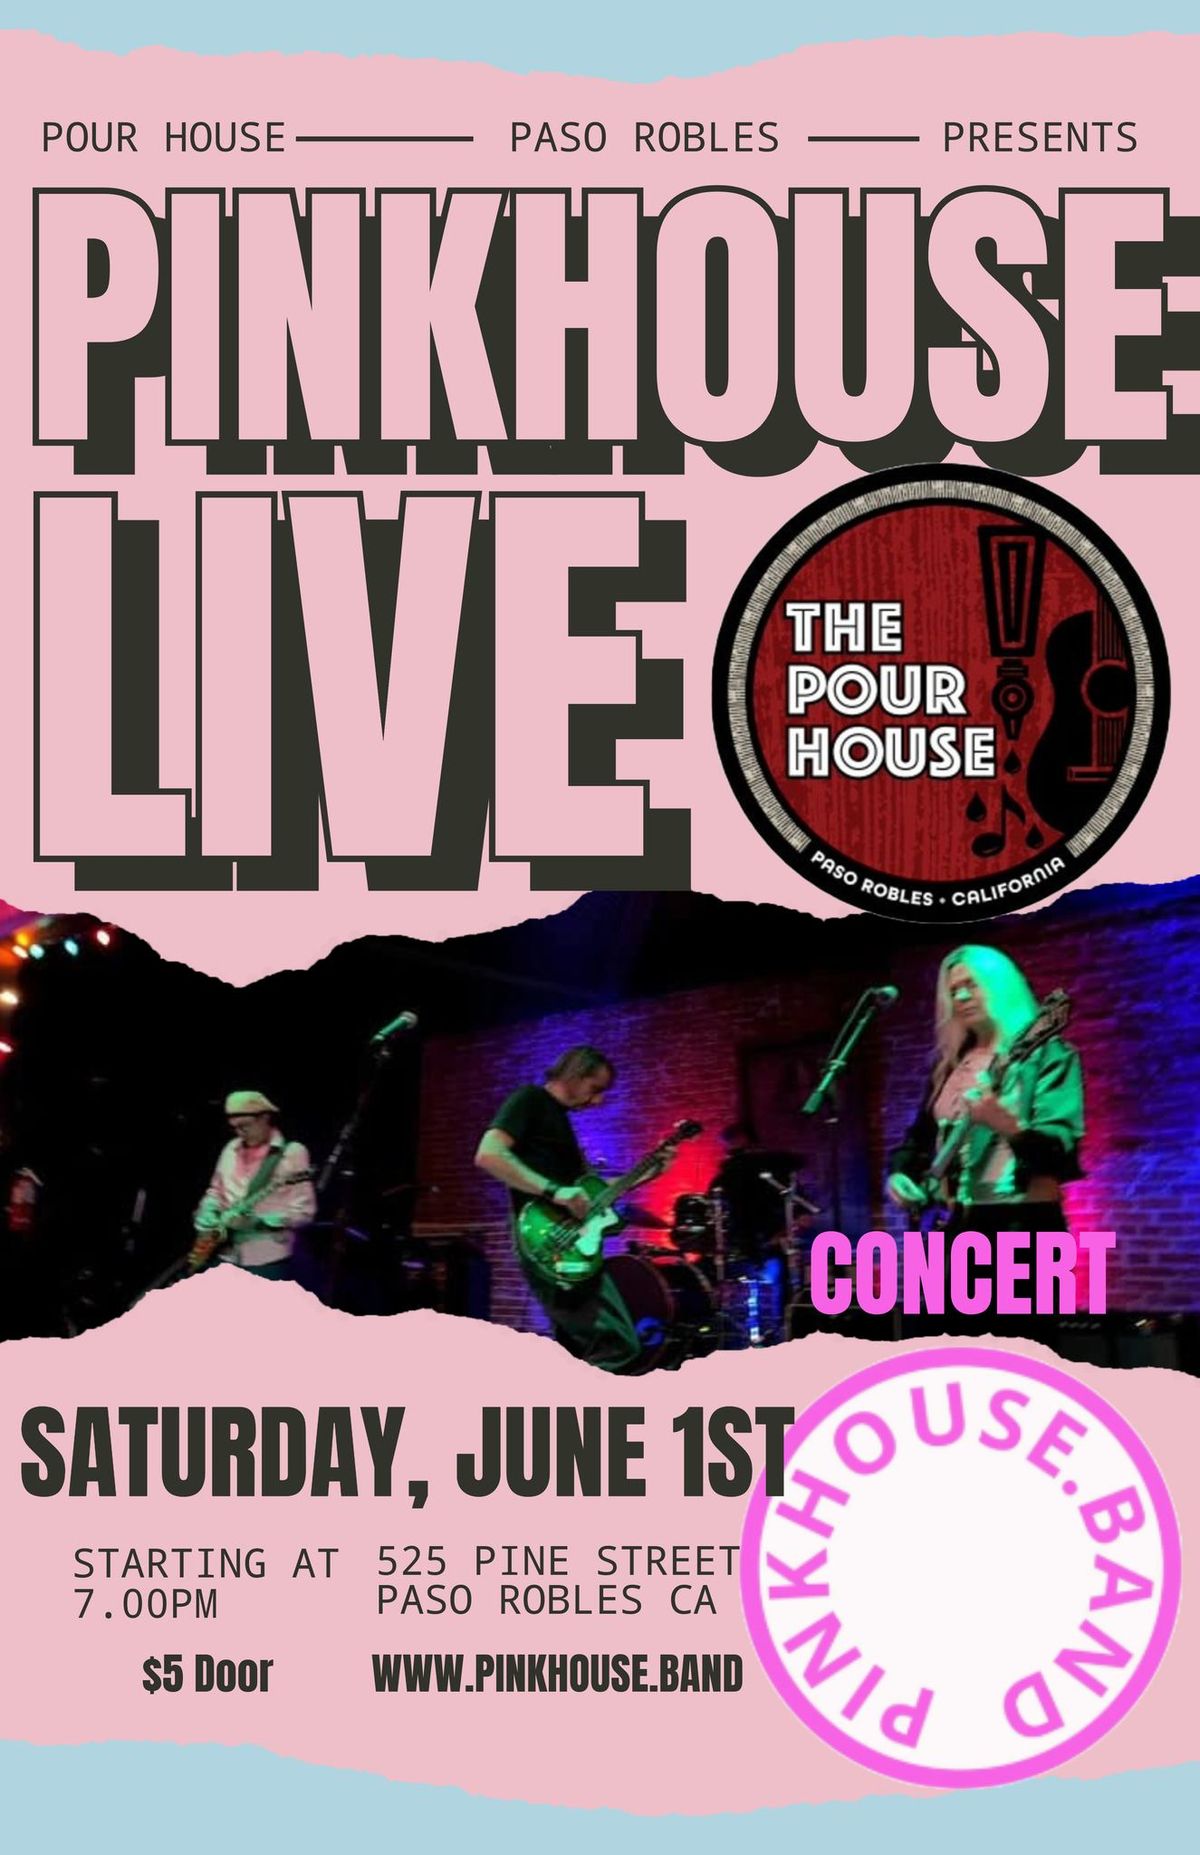 PINK HOUSE BAND live at the Pour House!